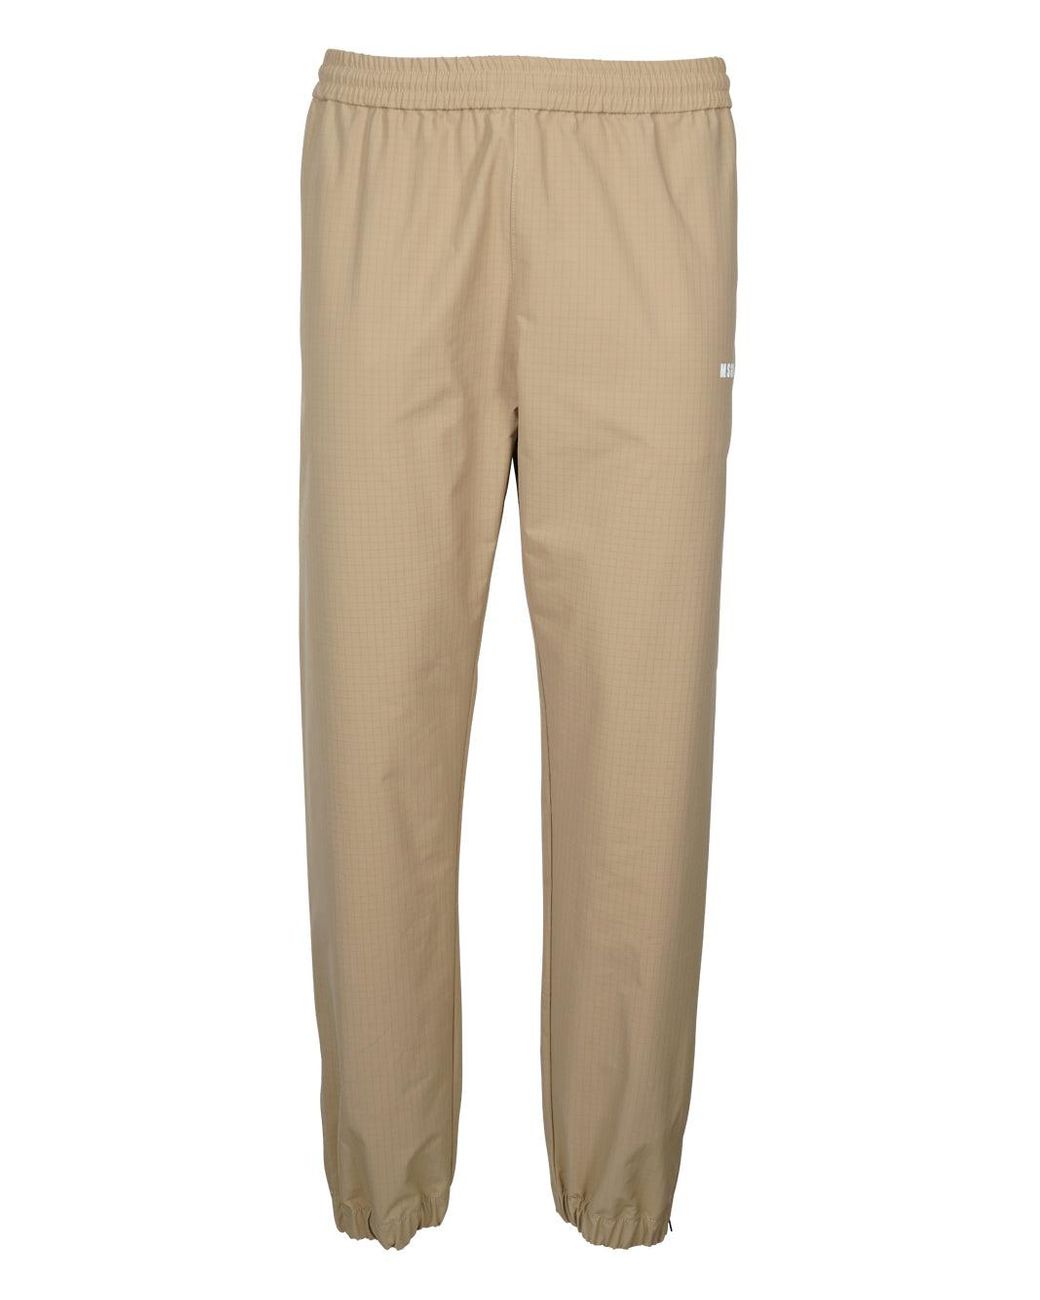 MSGM Cotton Trousers Clothing in Beige Natural Slacks and Chinos MSGM Trousers Slacks and Chinos Mens Trousers for Men 